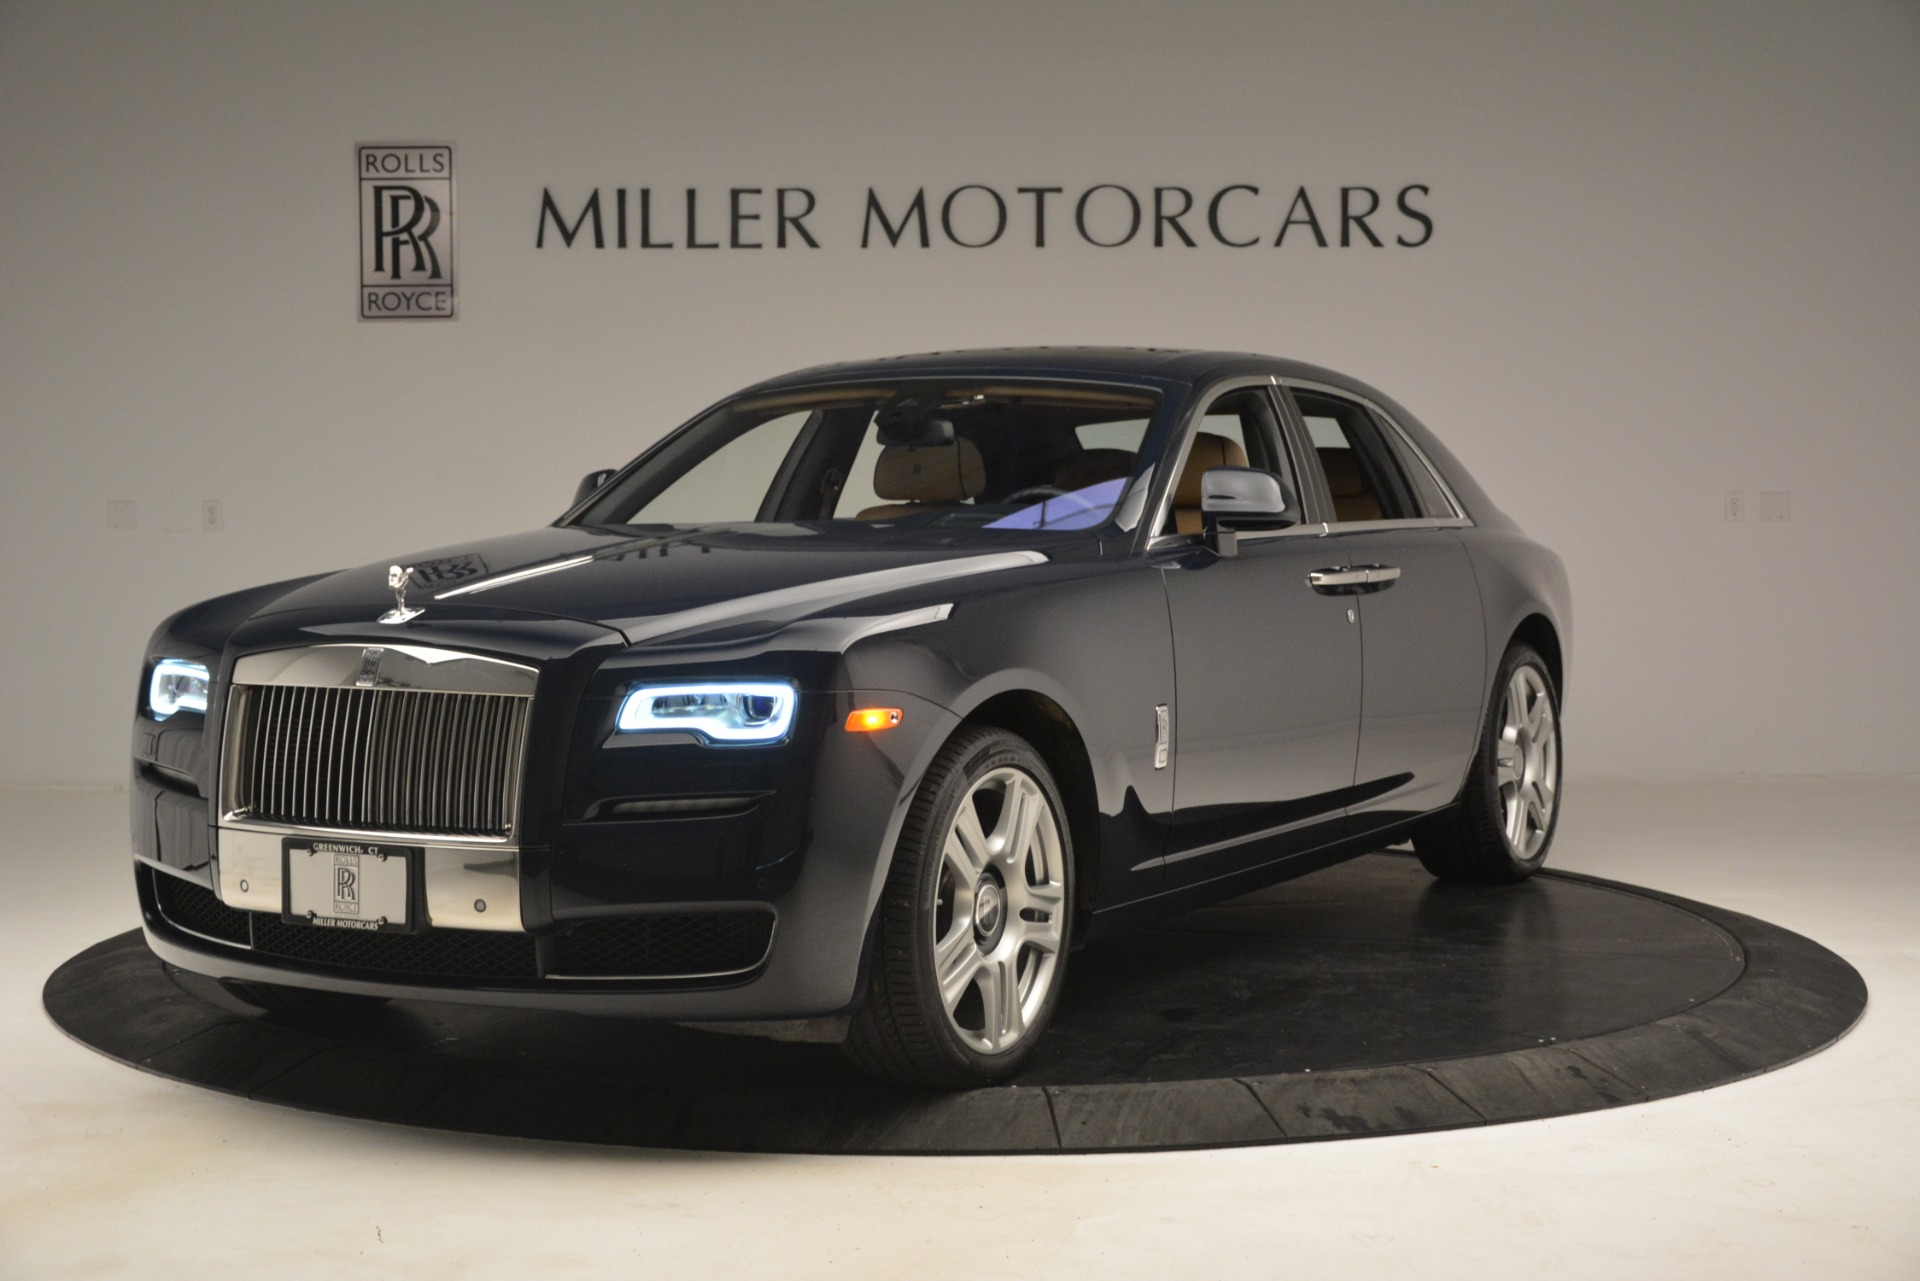 PreOwned 2015 RollsRoyce Ghost For Sale () Miller Motorcars Stock 7445A